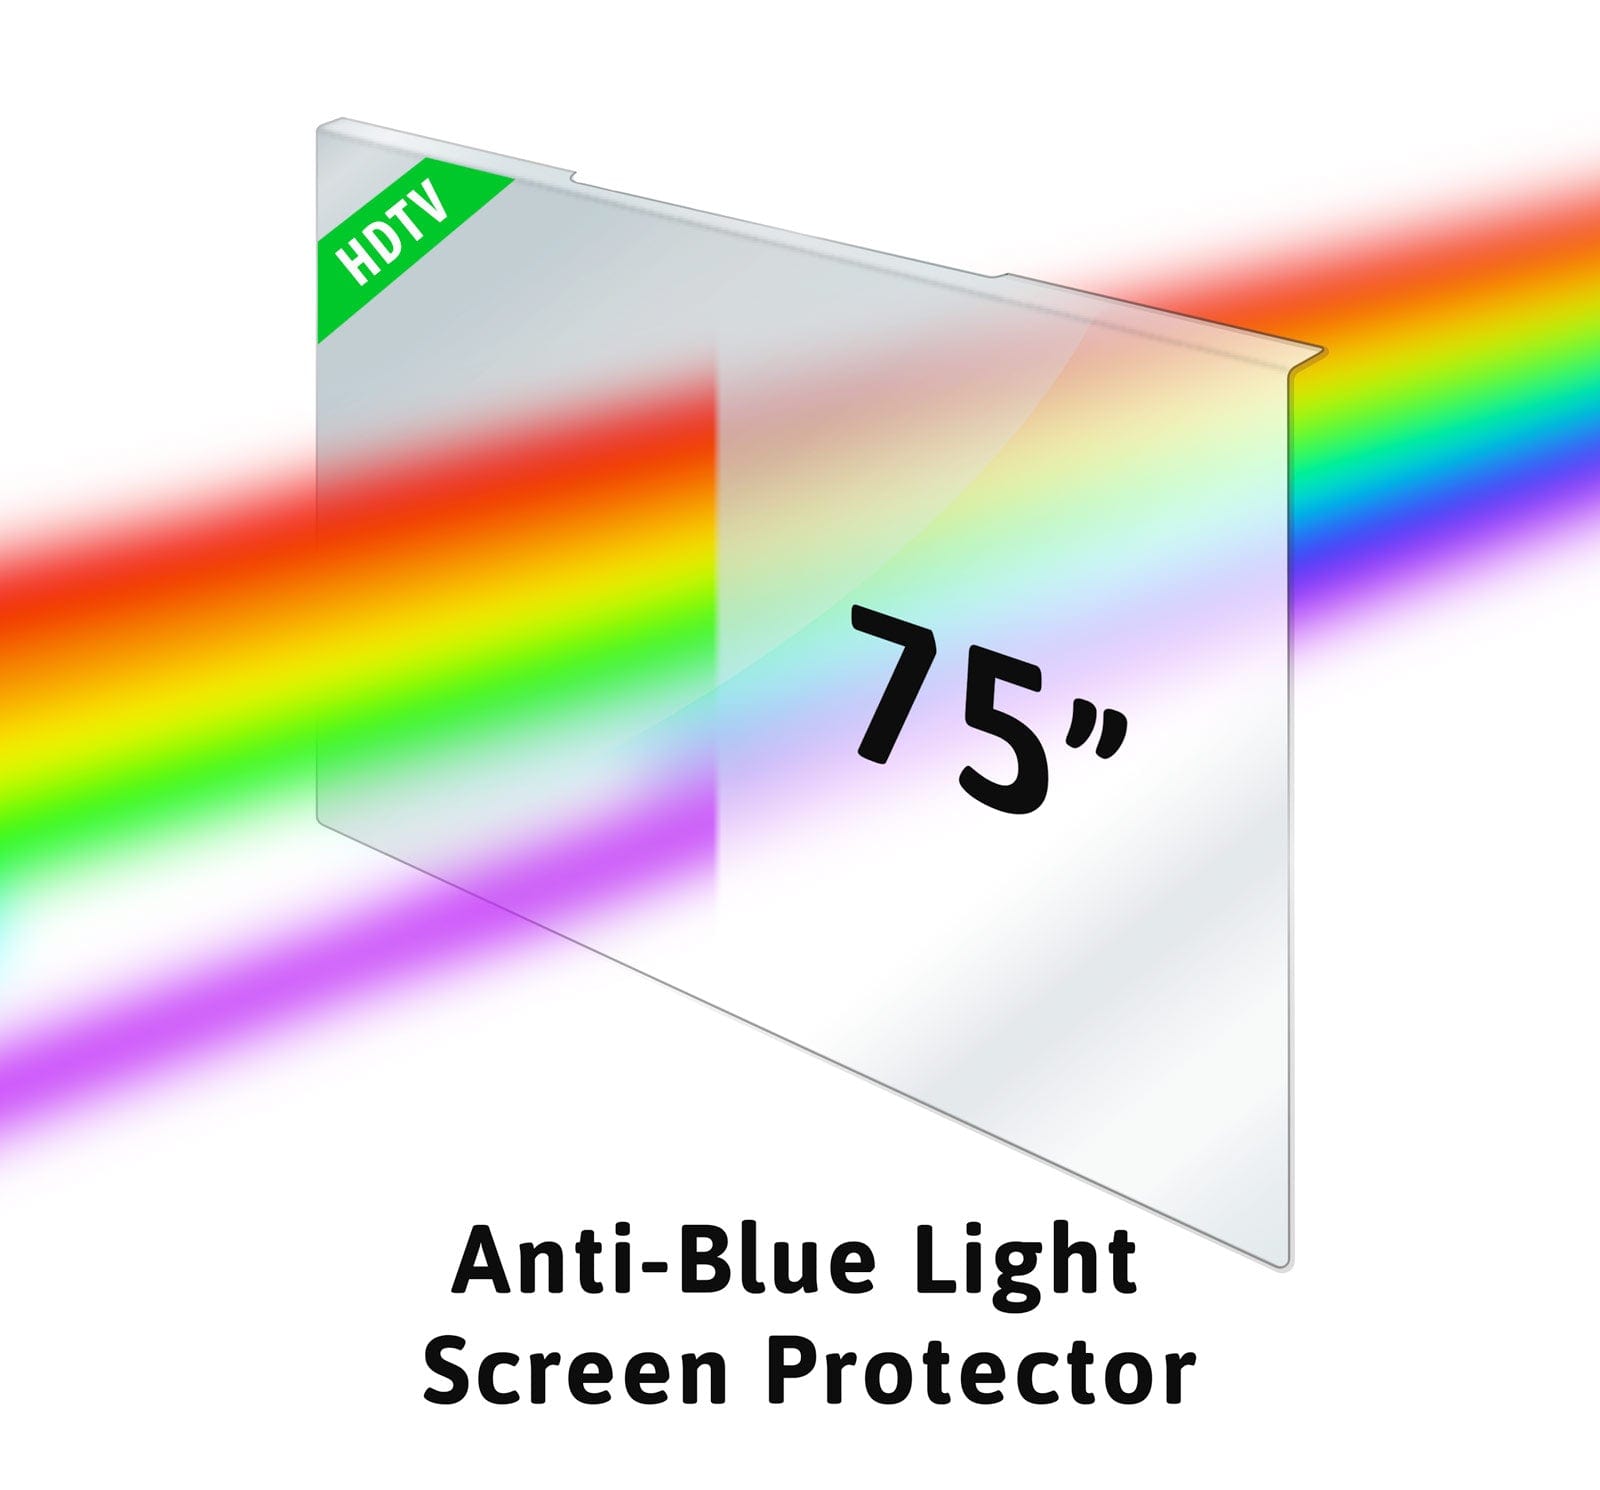 Anti-Blue Light Clear TV Screen Protector for Most 75" TVs